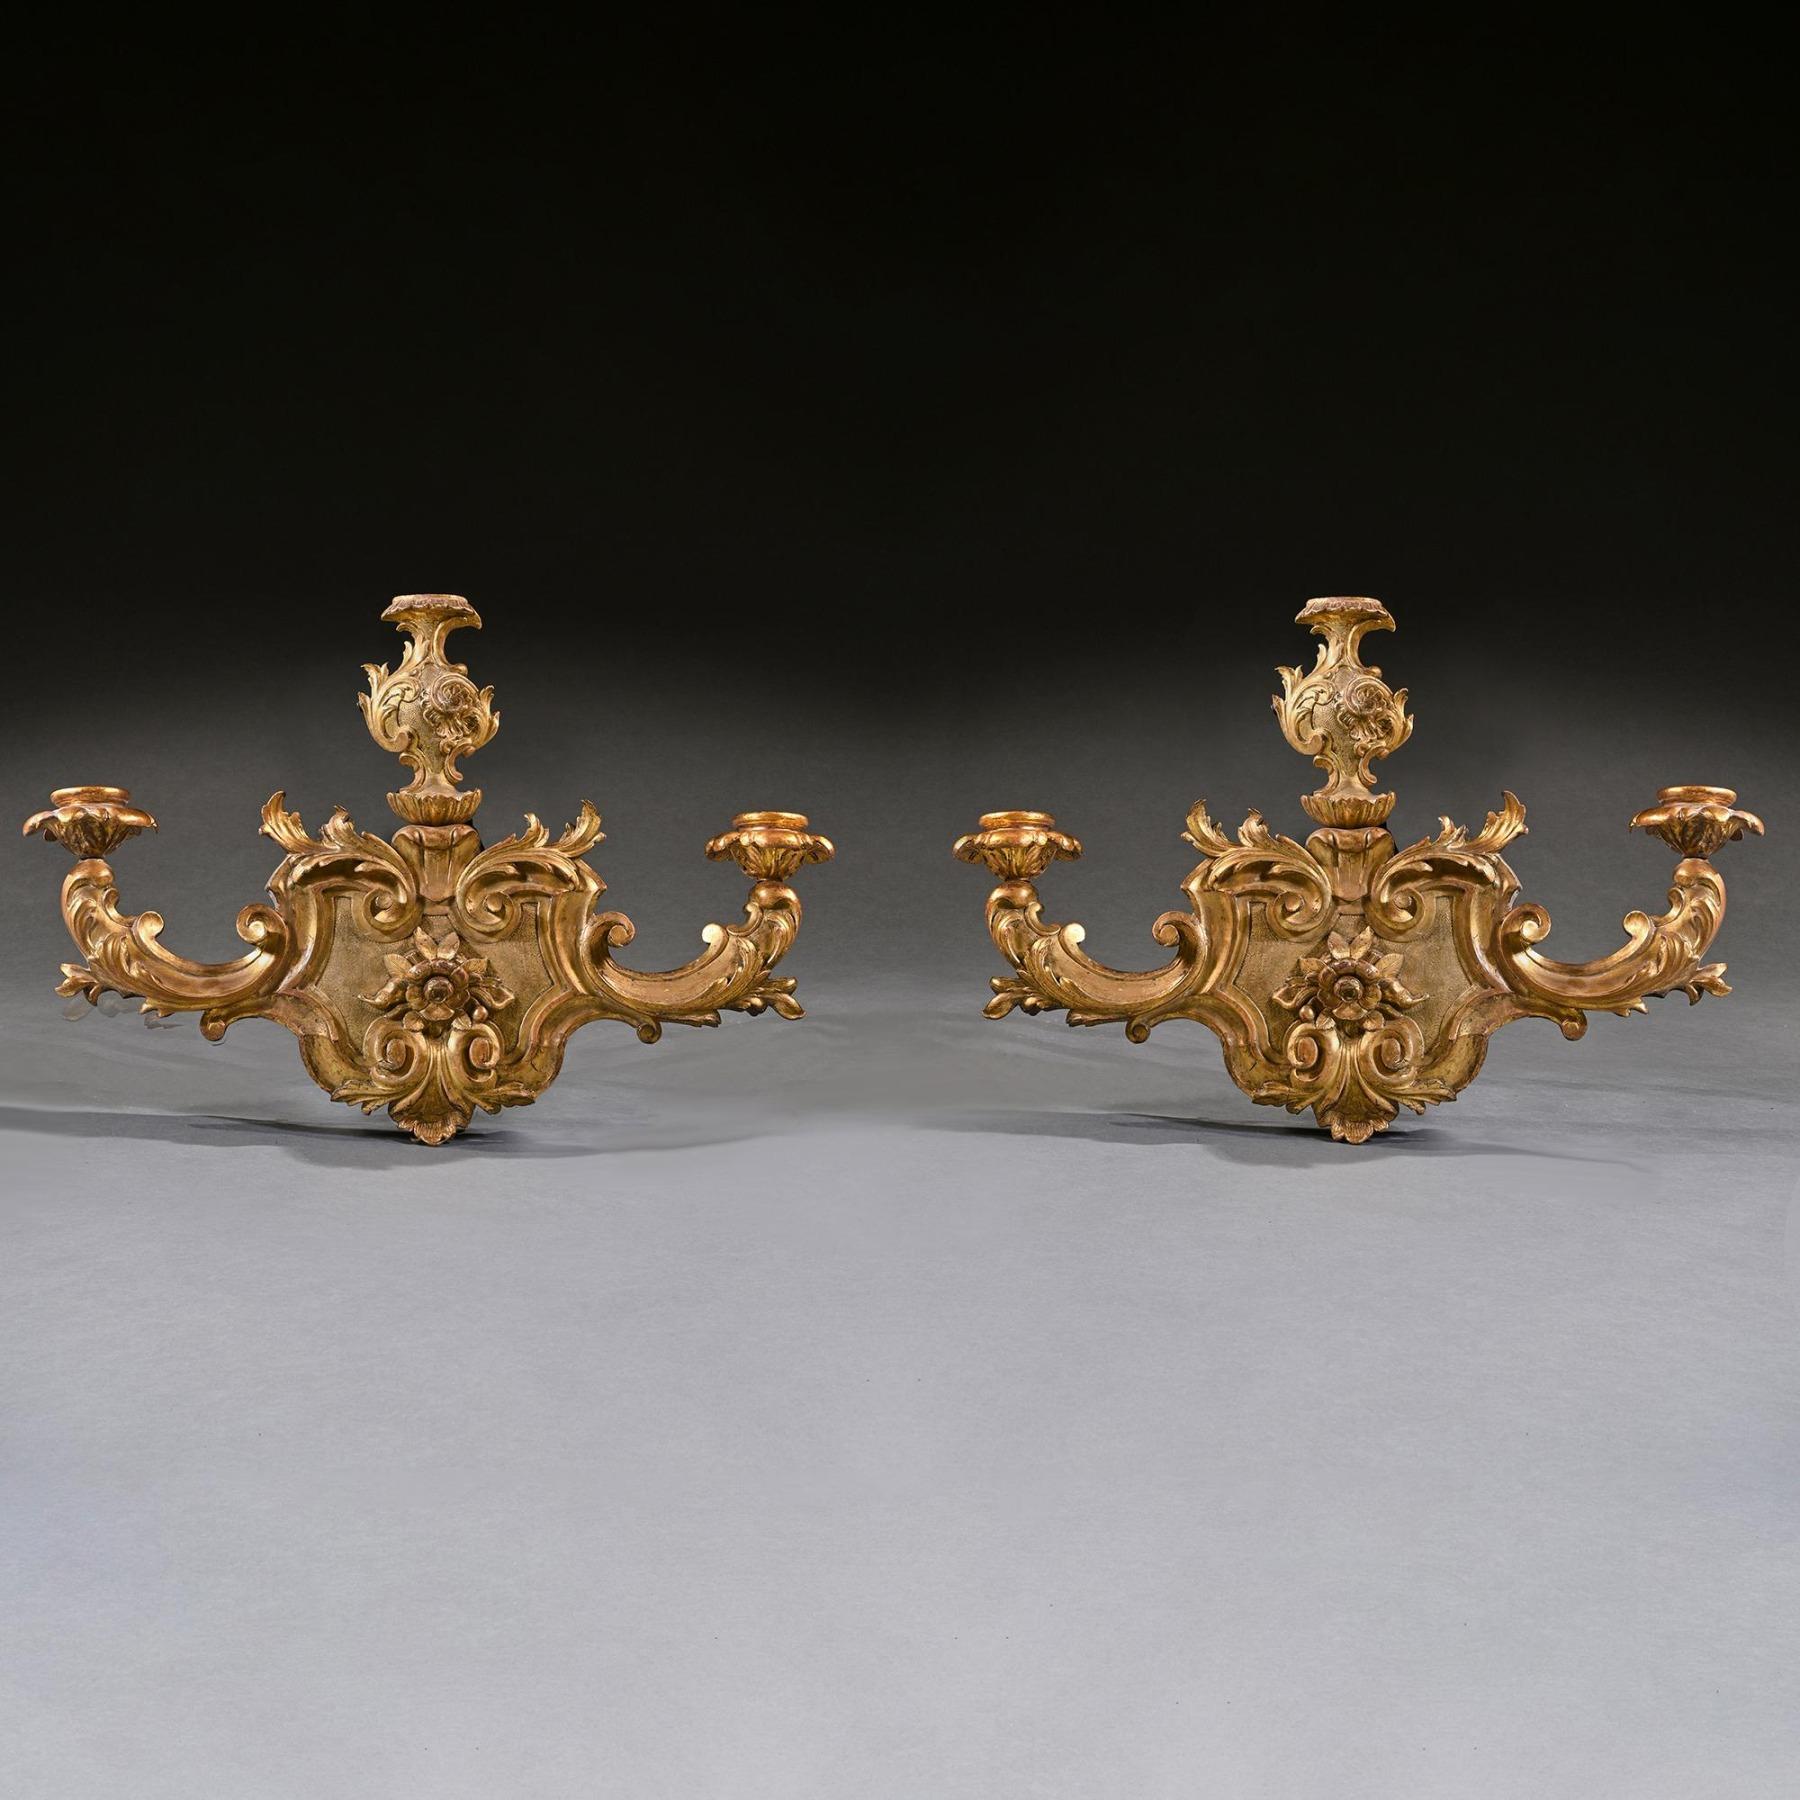 Pair of 18th Century Venetian Giltwood Wall Sconces For Sale 2